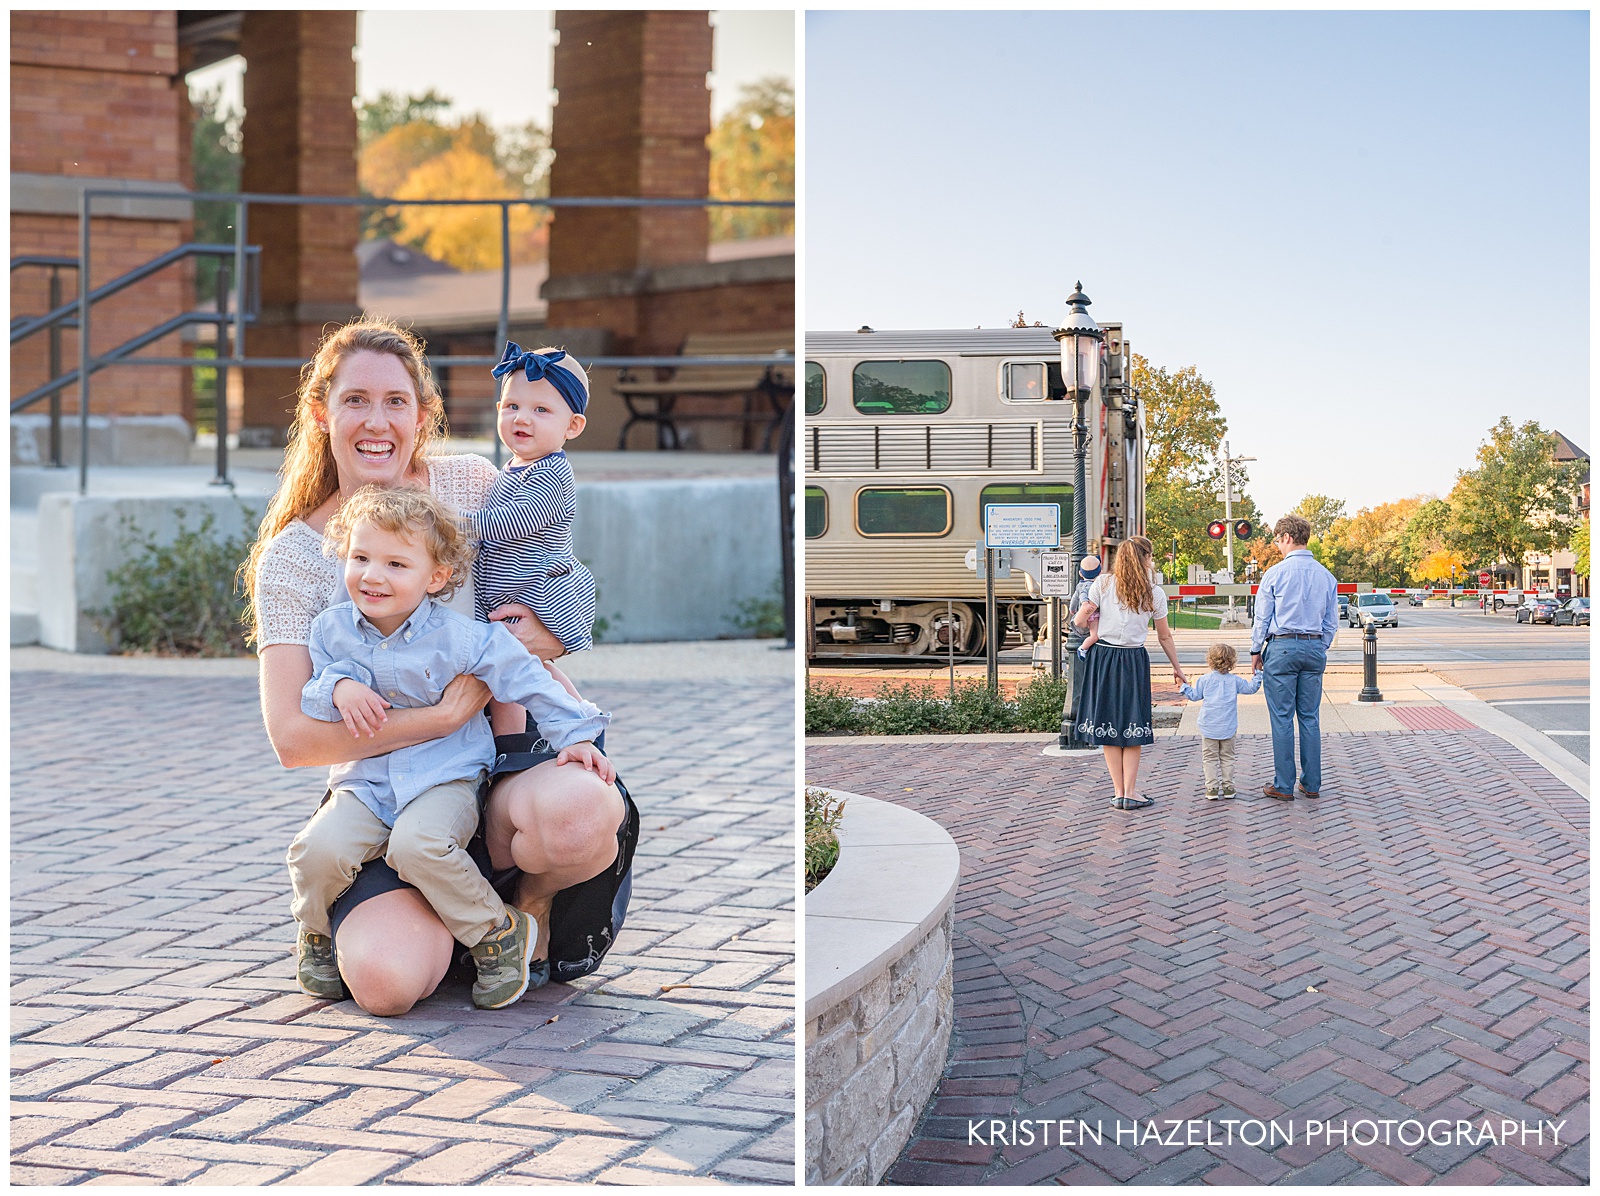 Mother crouching down next to young son and daughter, and watching a train go by